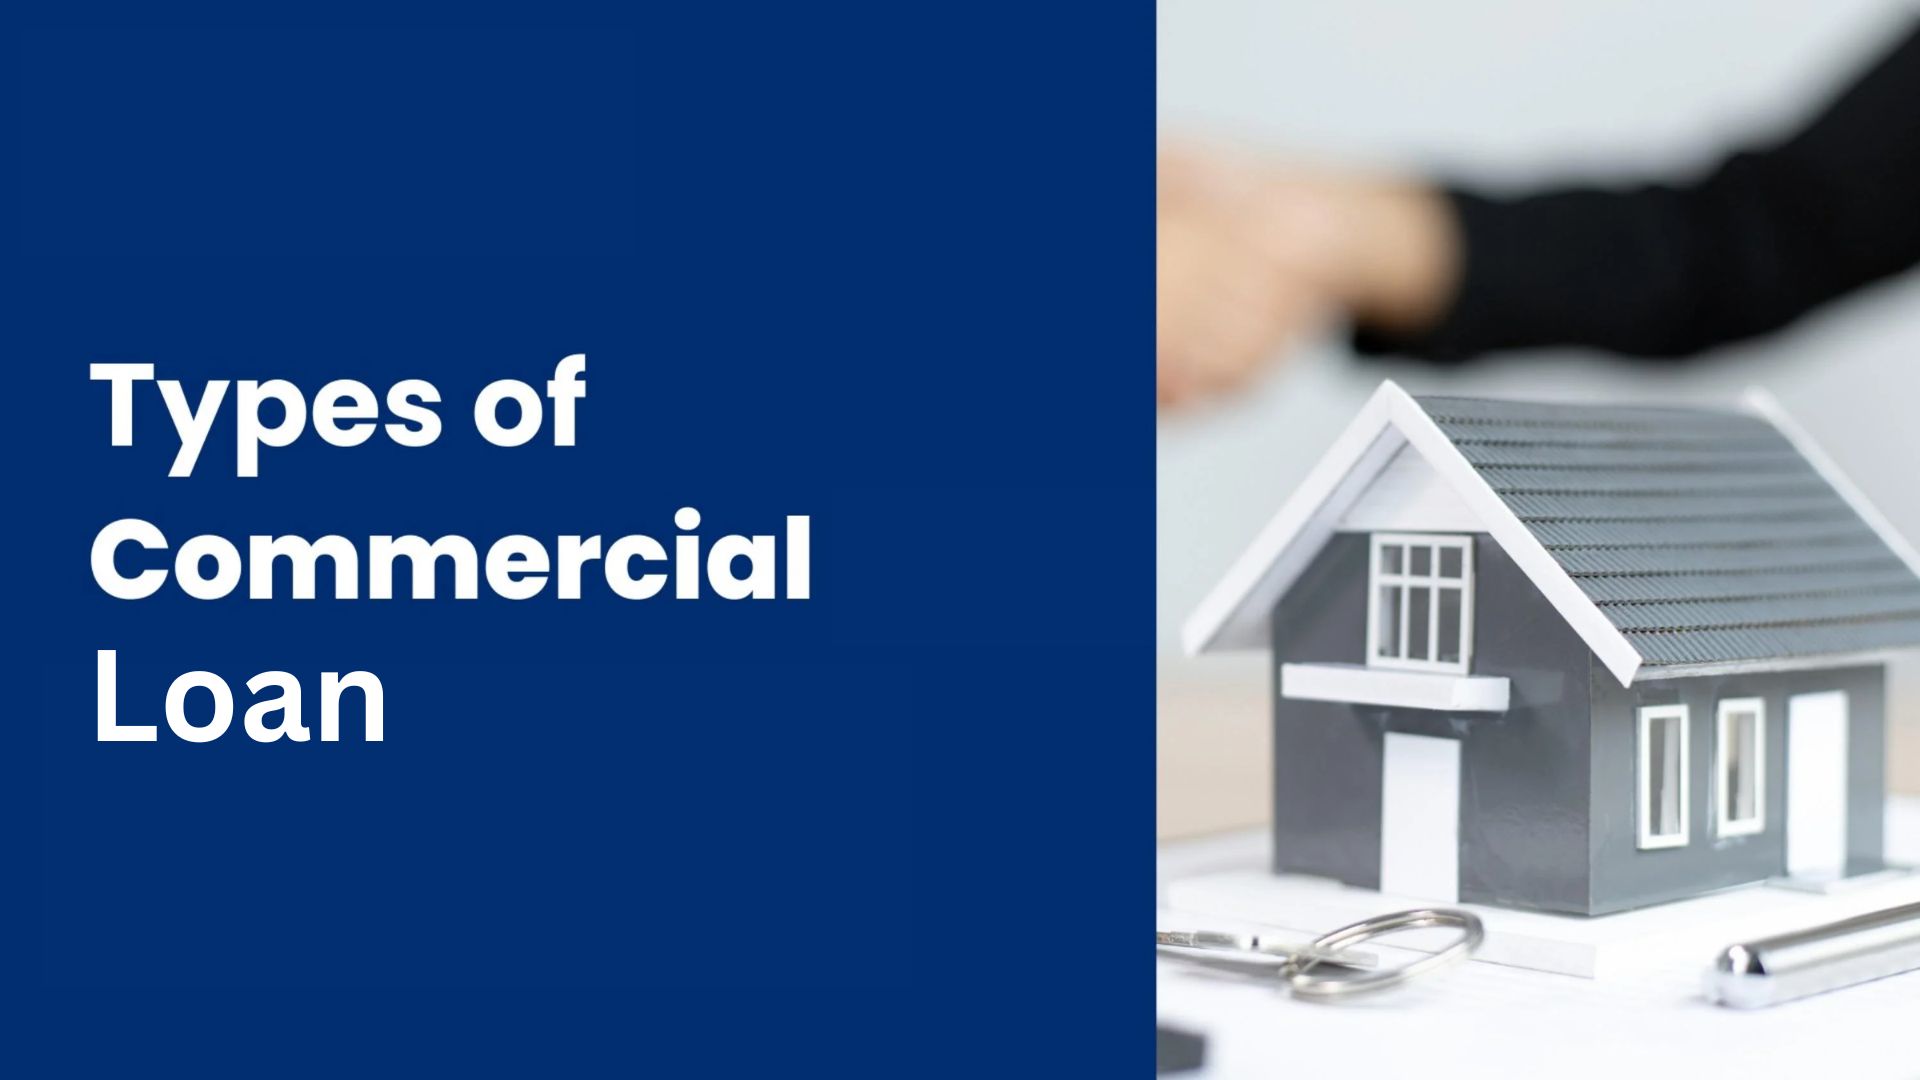 Types of Commercial Loans